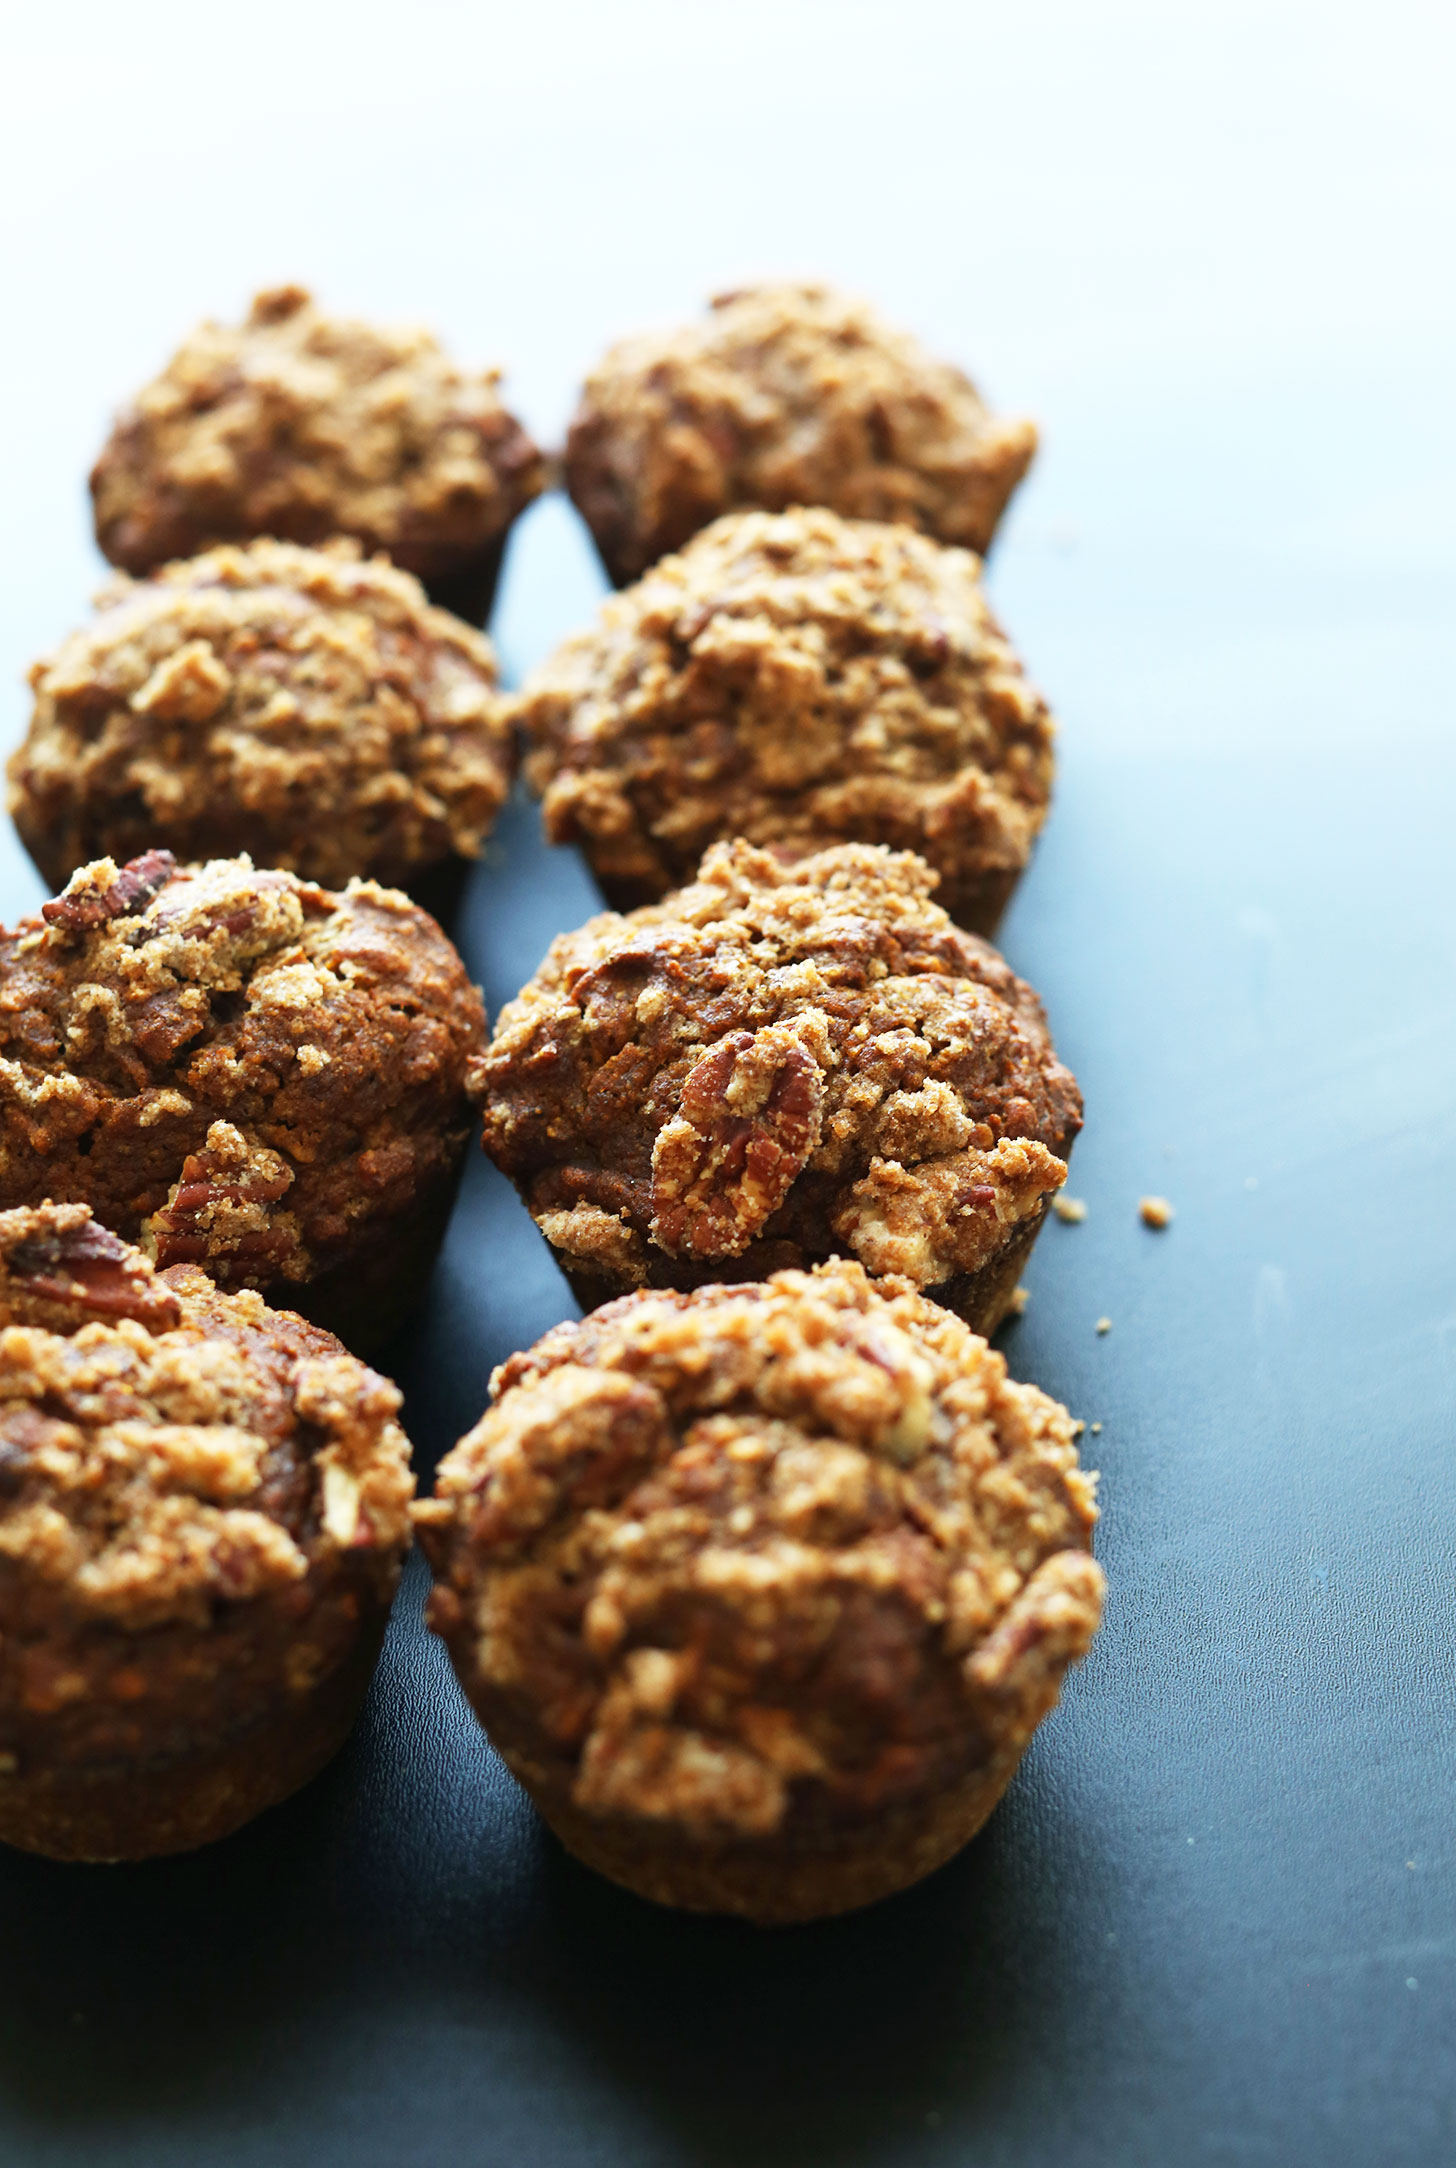 Eight Vegan Pumpkin Spice Muffins with Pecan Crumble Topping for a simple fall dessert